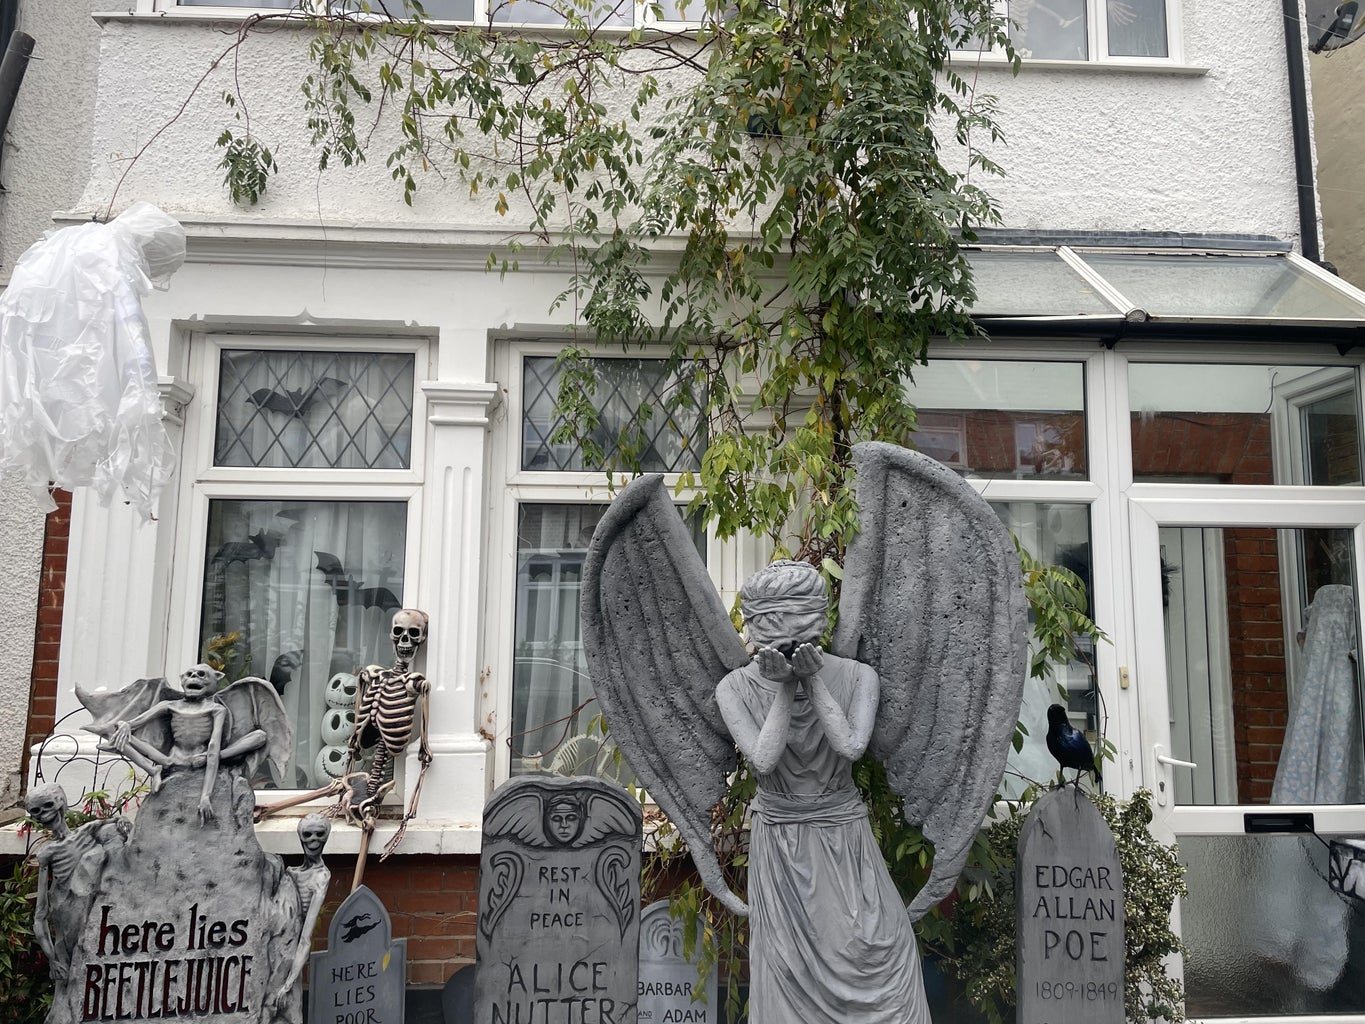 Life-size Moving Weeping Angel